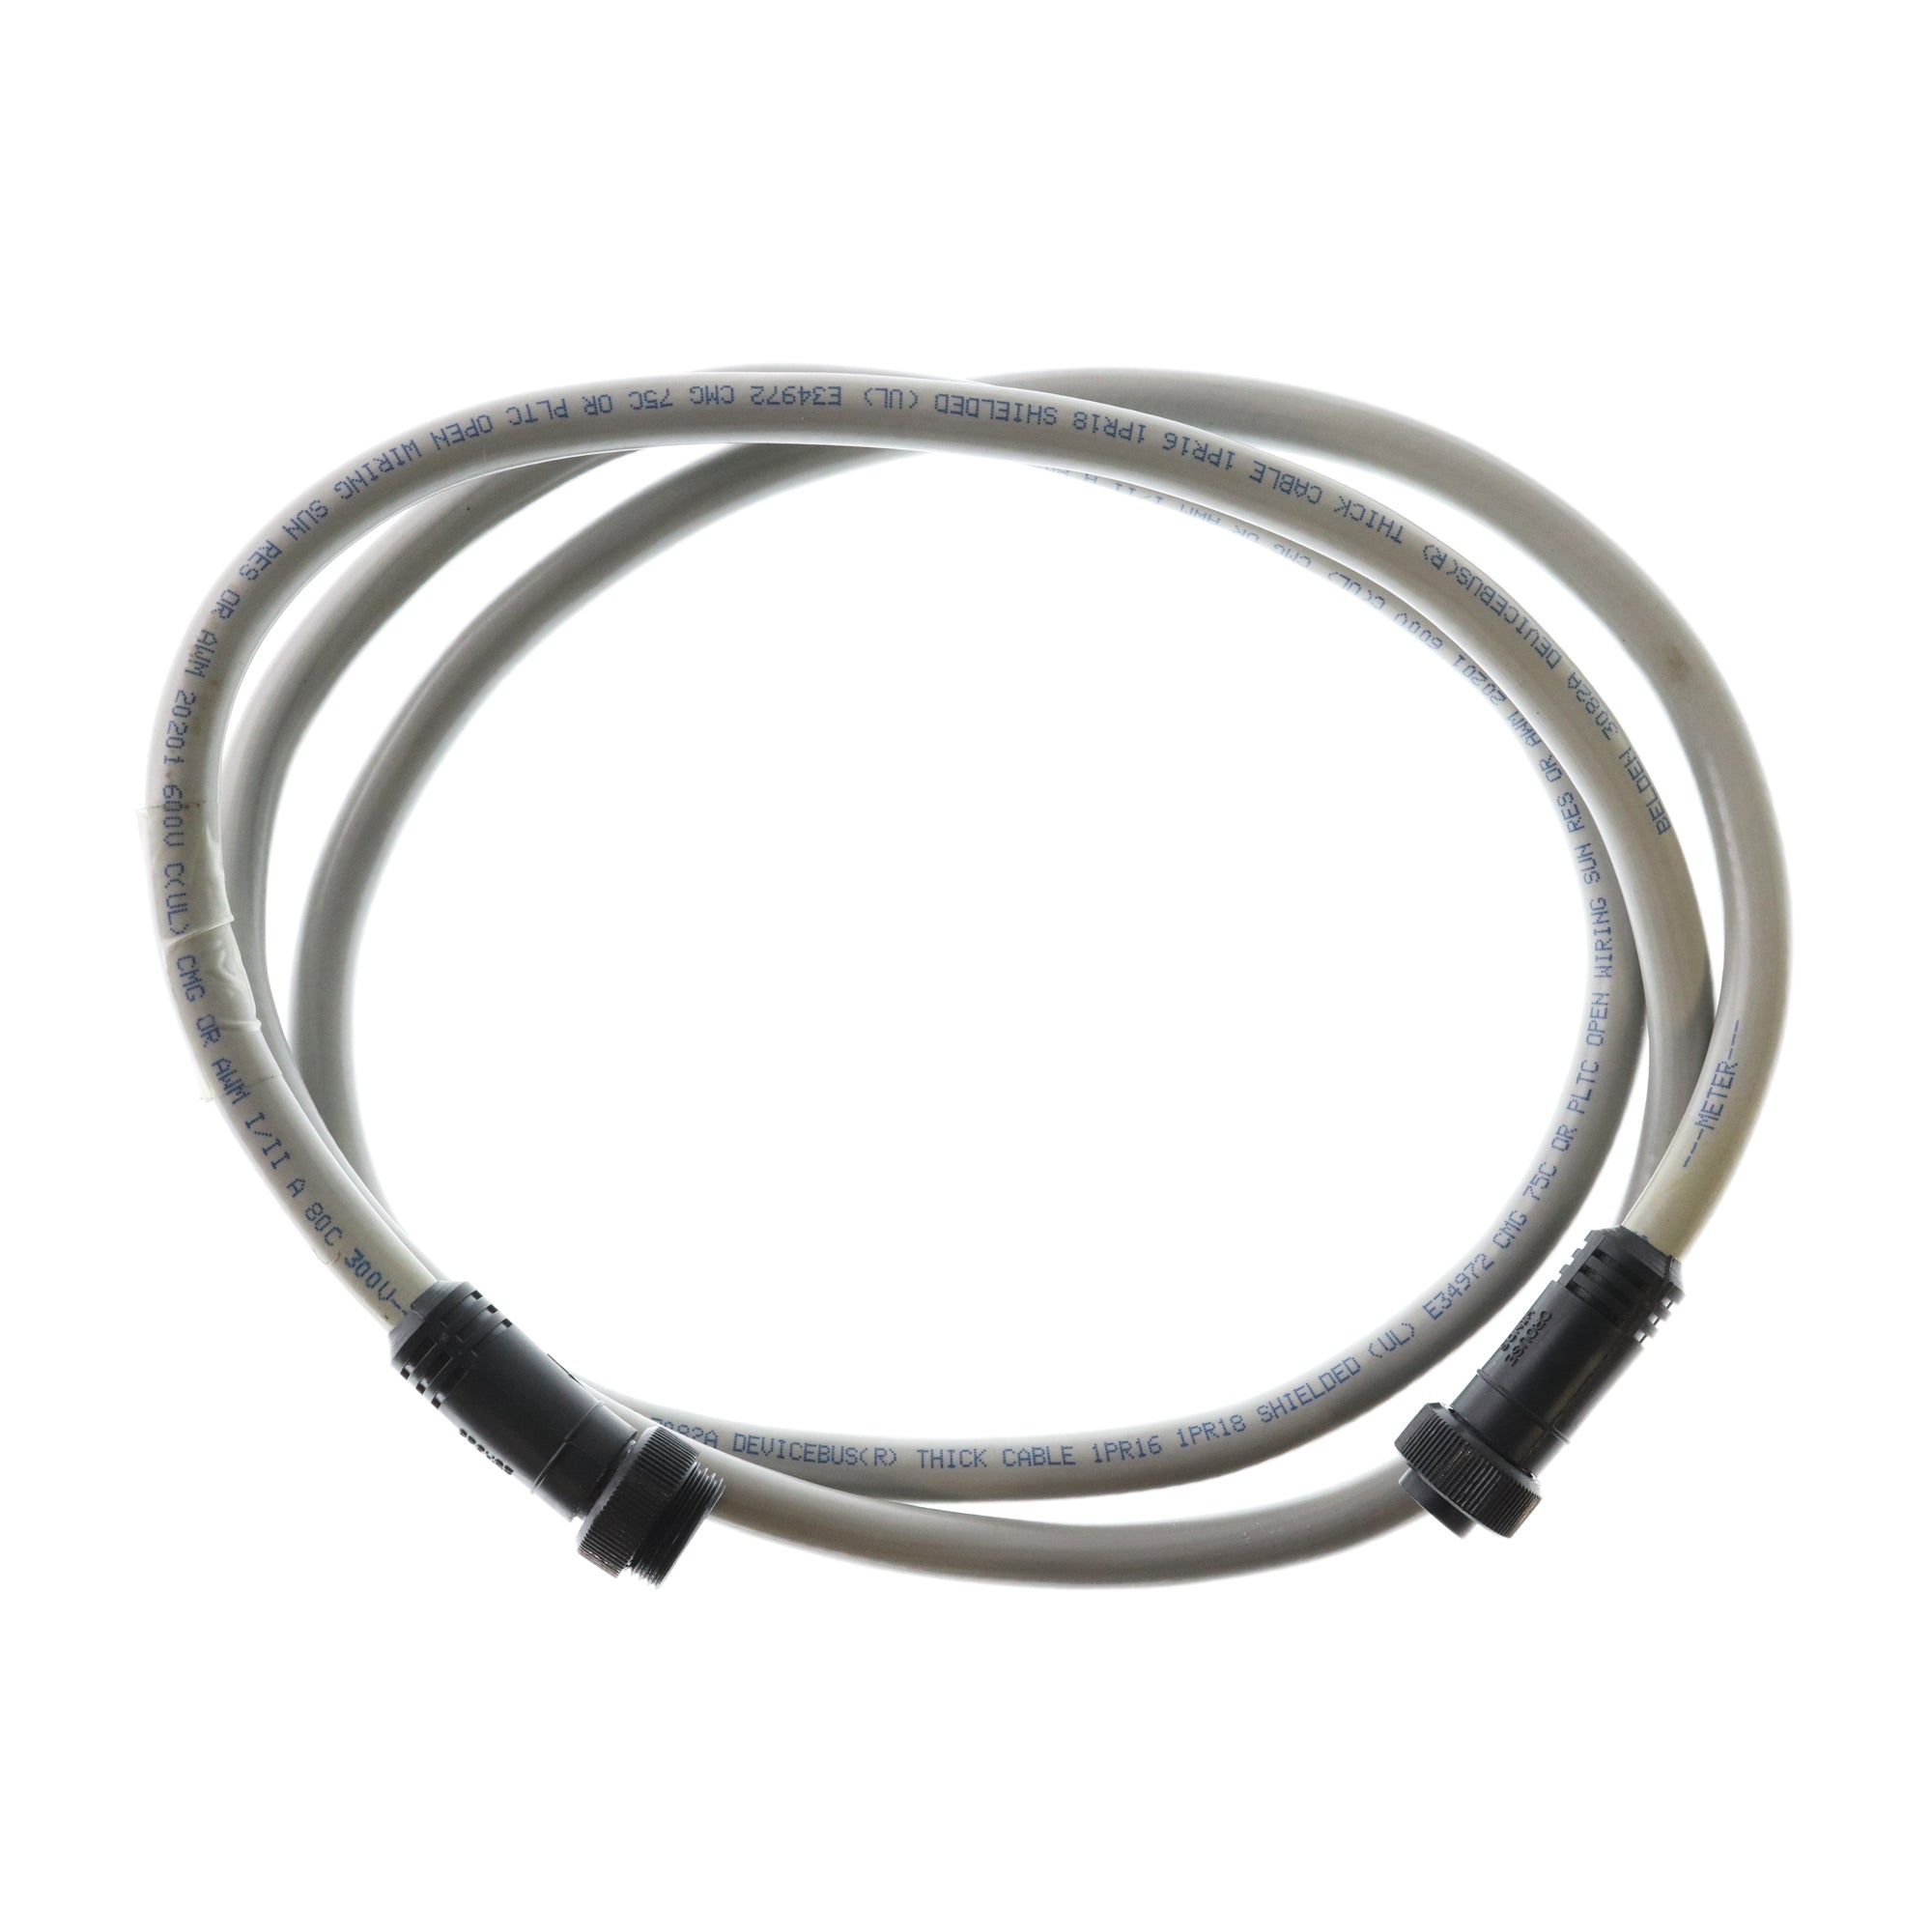 Cooper, COOPER CROUSE-HINDS CHDN-EAE-T2 MINI 5P DEVICENET CABLE ASSEMBLY, 2-METERS